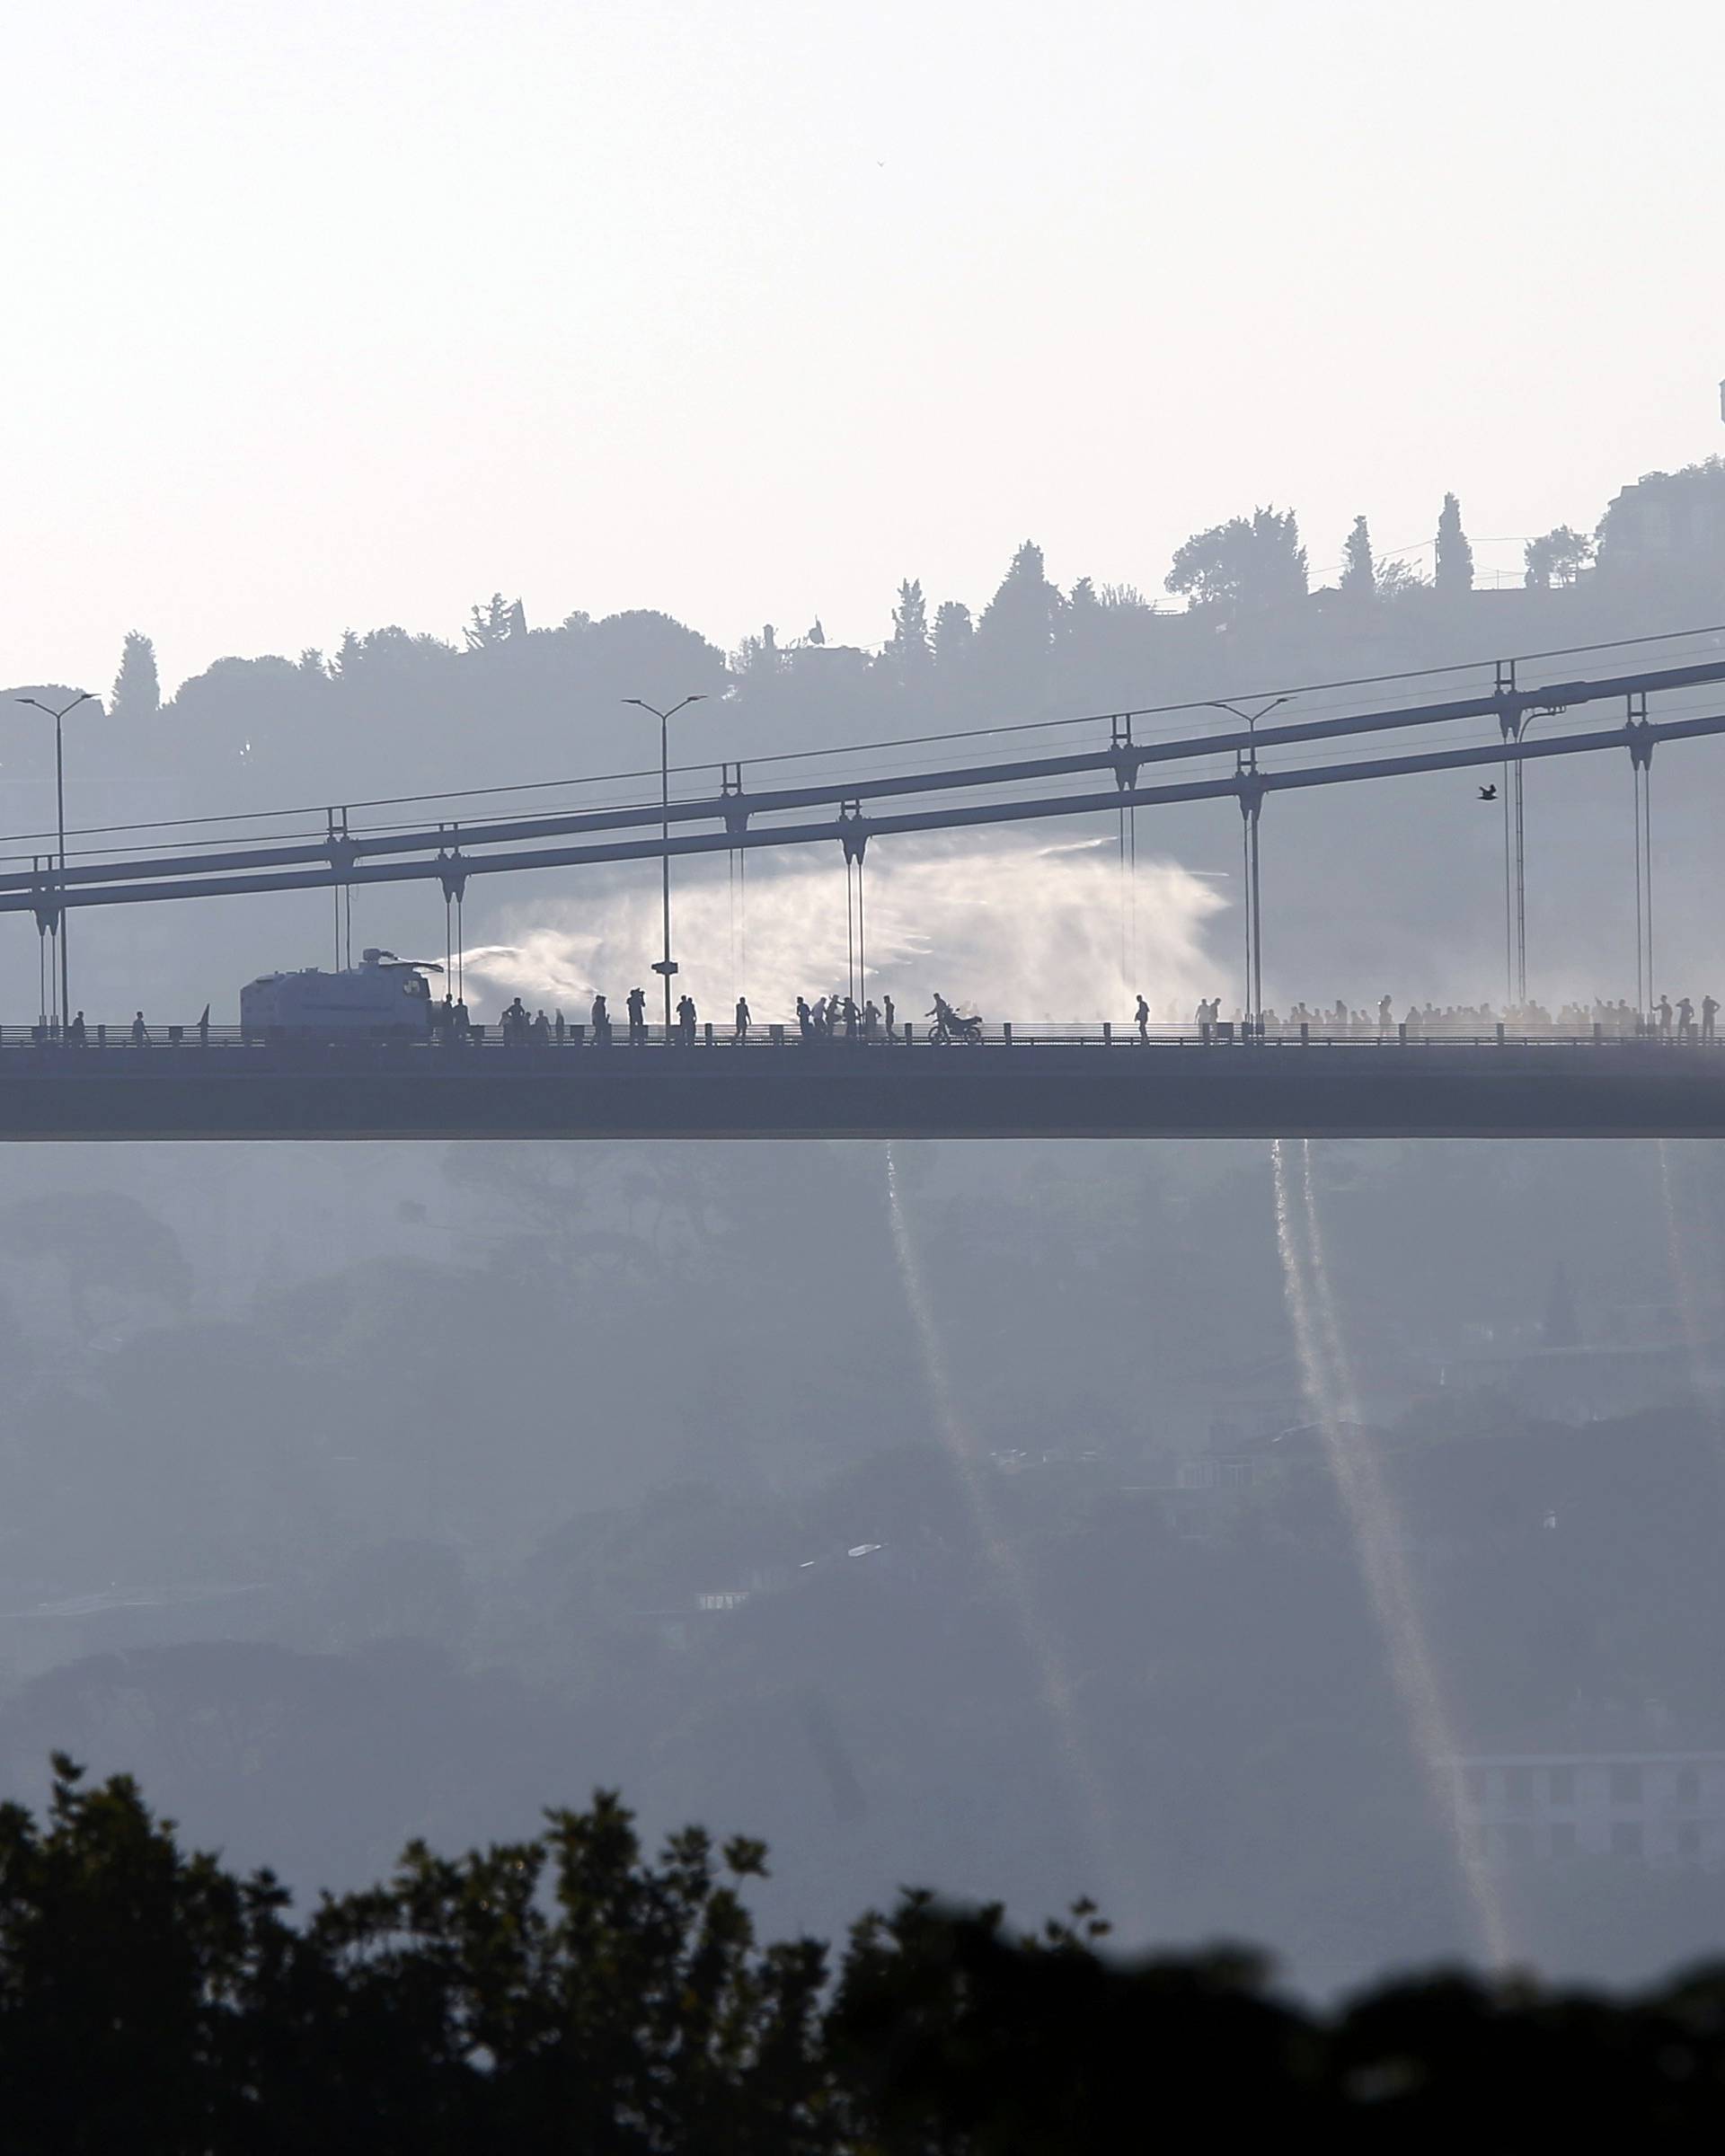 A police armored vehicle uses a water cannon to disperse anti-government forces on Bosphorus Bridge in Istanbul